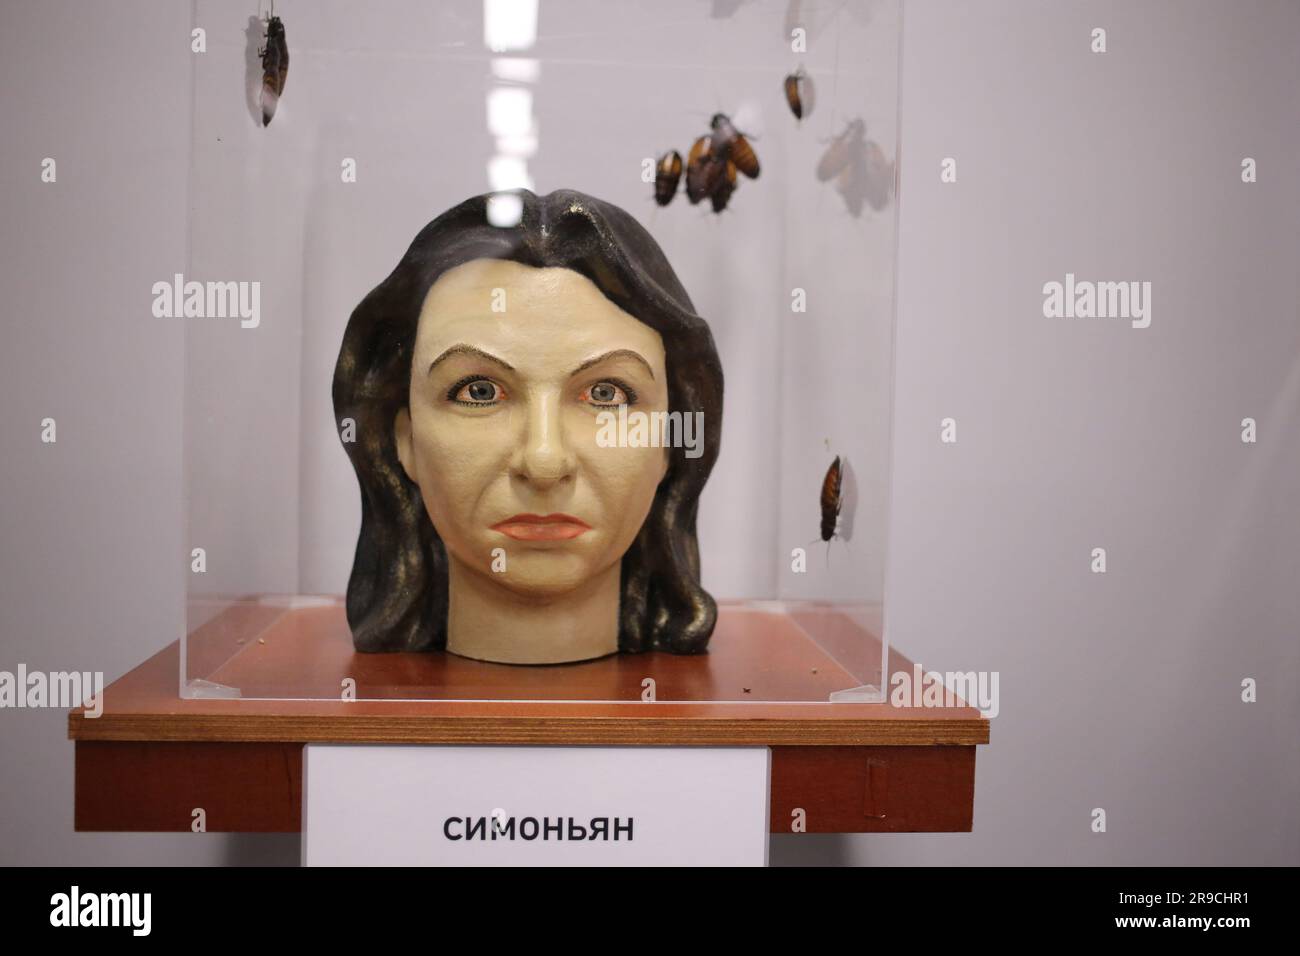 Artificial head of Margarita Simonyan (Russian journalist, media manager, editor-in-chief of the state television channel RT since 2005) surrounded by Madagascar cockroaches is seen at the exhibition 'Heads' at Uspenskaya 60. Exhibition-performance 'Heads' by Anton Tkachenko opened at Uspenskaya 60. Visitors could look at the artificial heads of the media people of the Russian Federation, surrounded by Madagascar cockroaches, take part in a performance - pour earth into the coffin with Vladimir Putin. The goal is for the visitor to experience disgust for public figures of the Russian Federatio Stock Photo